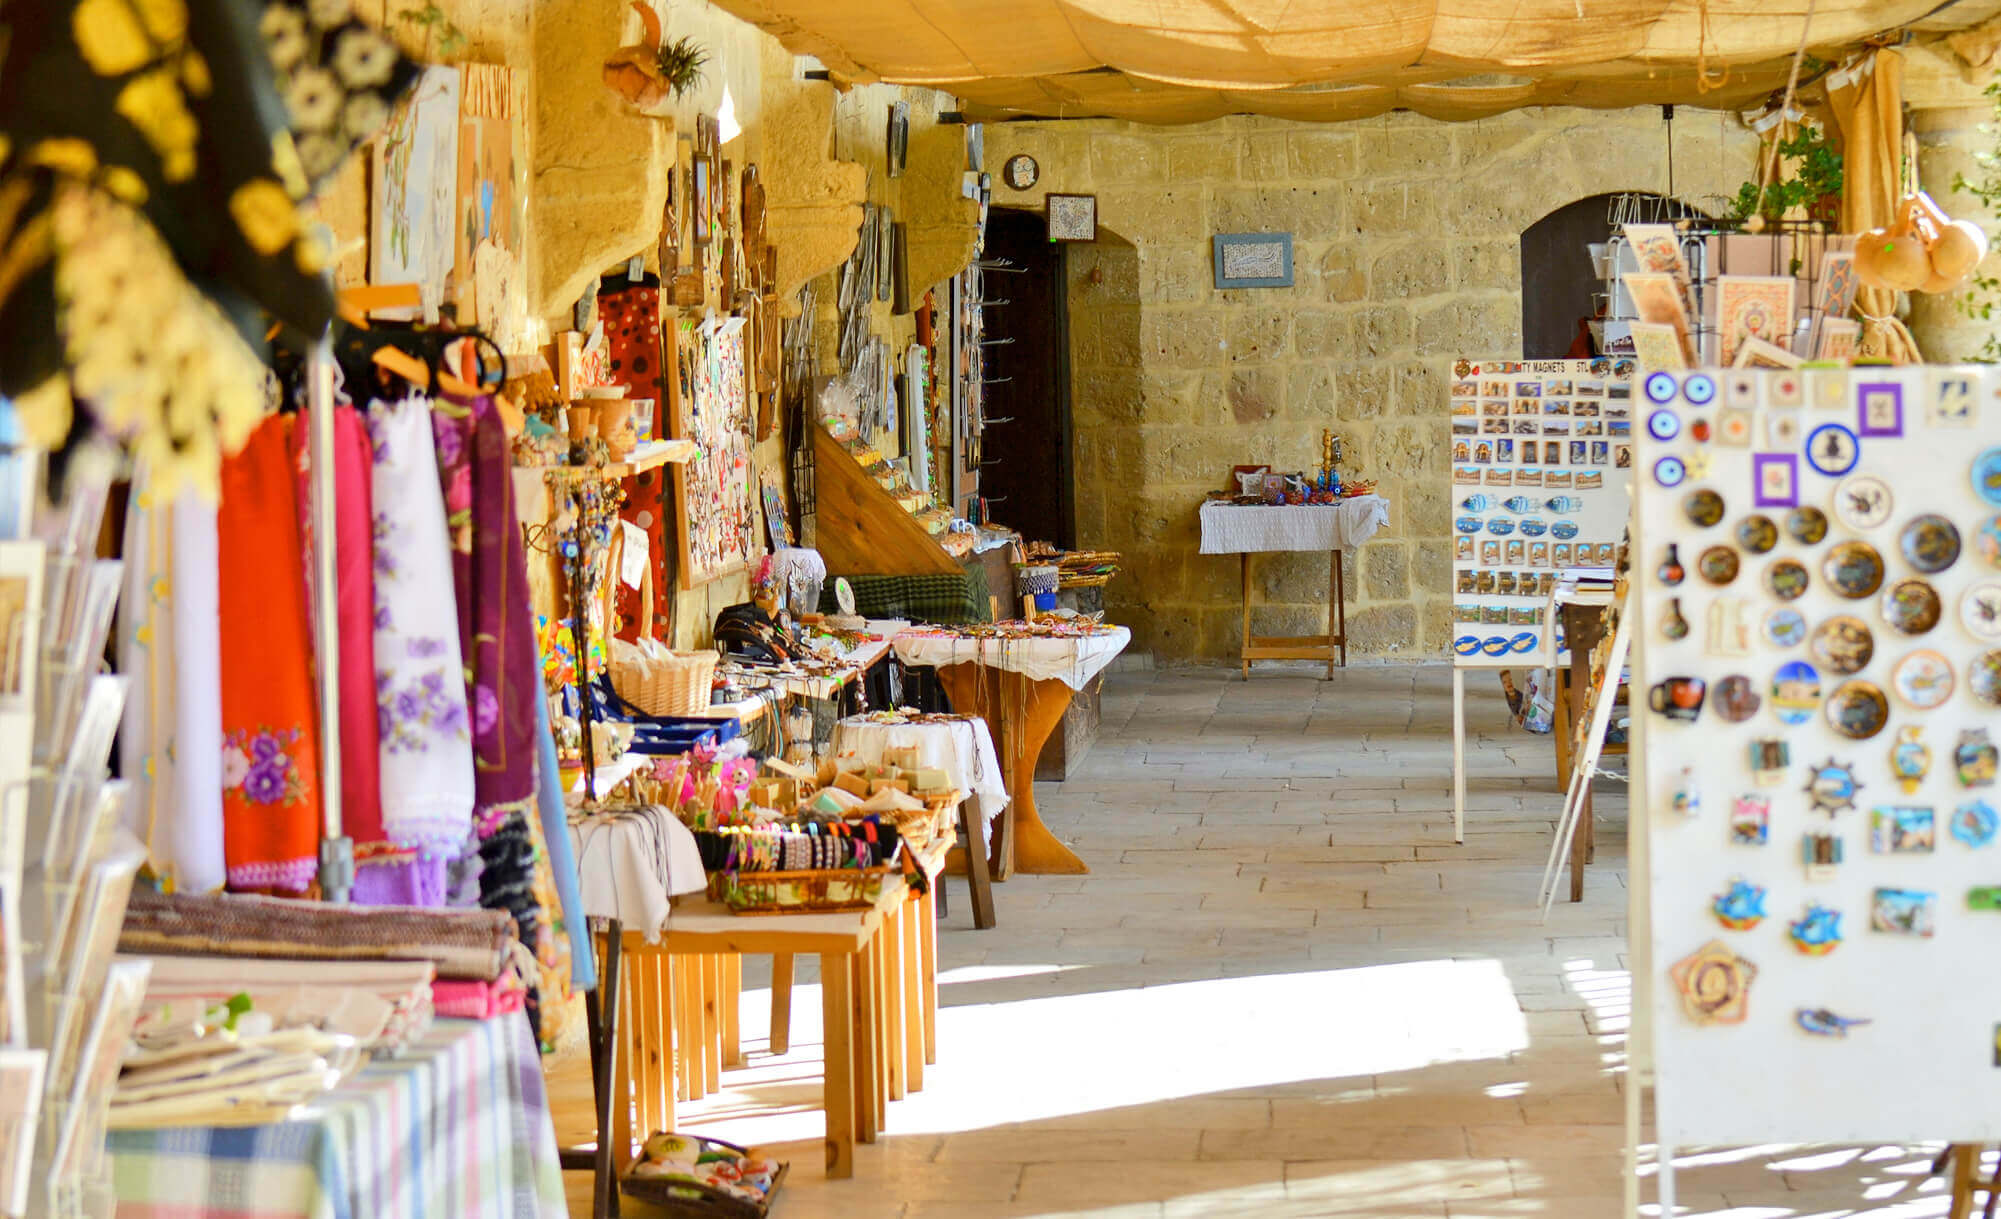 Pick up some souvenirs, with an abundance of local shops to choose from